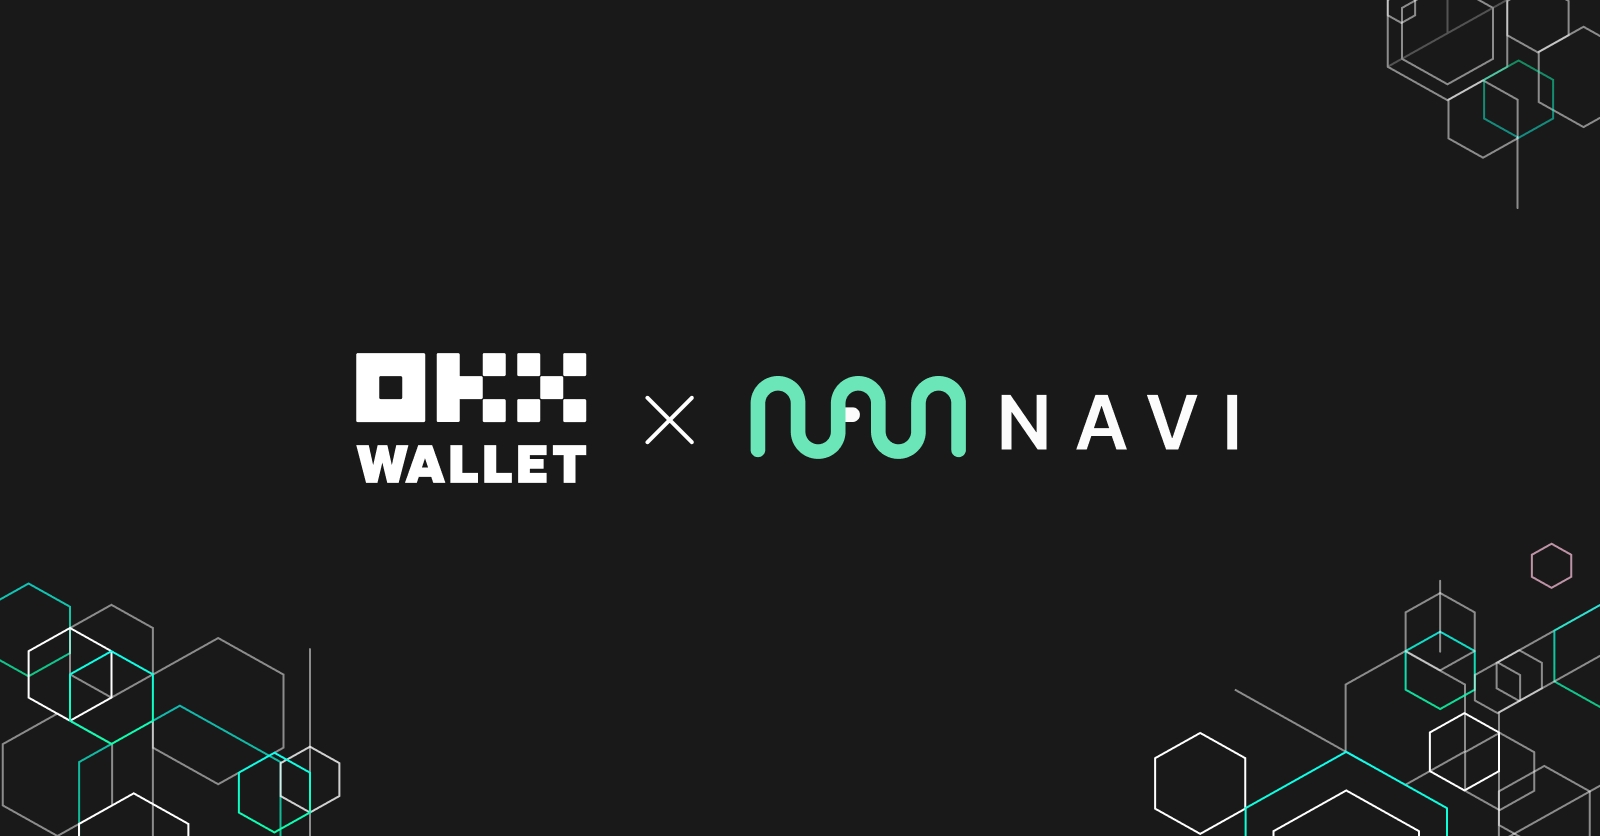 OKX Wallet Integrated with NAVI